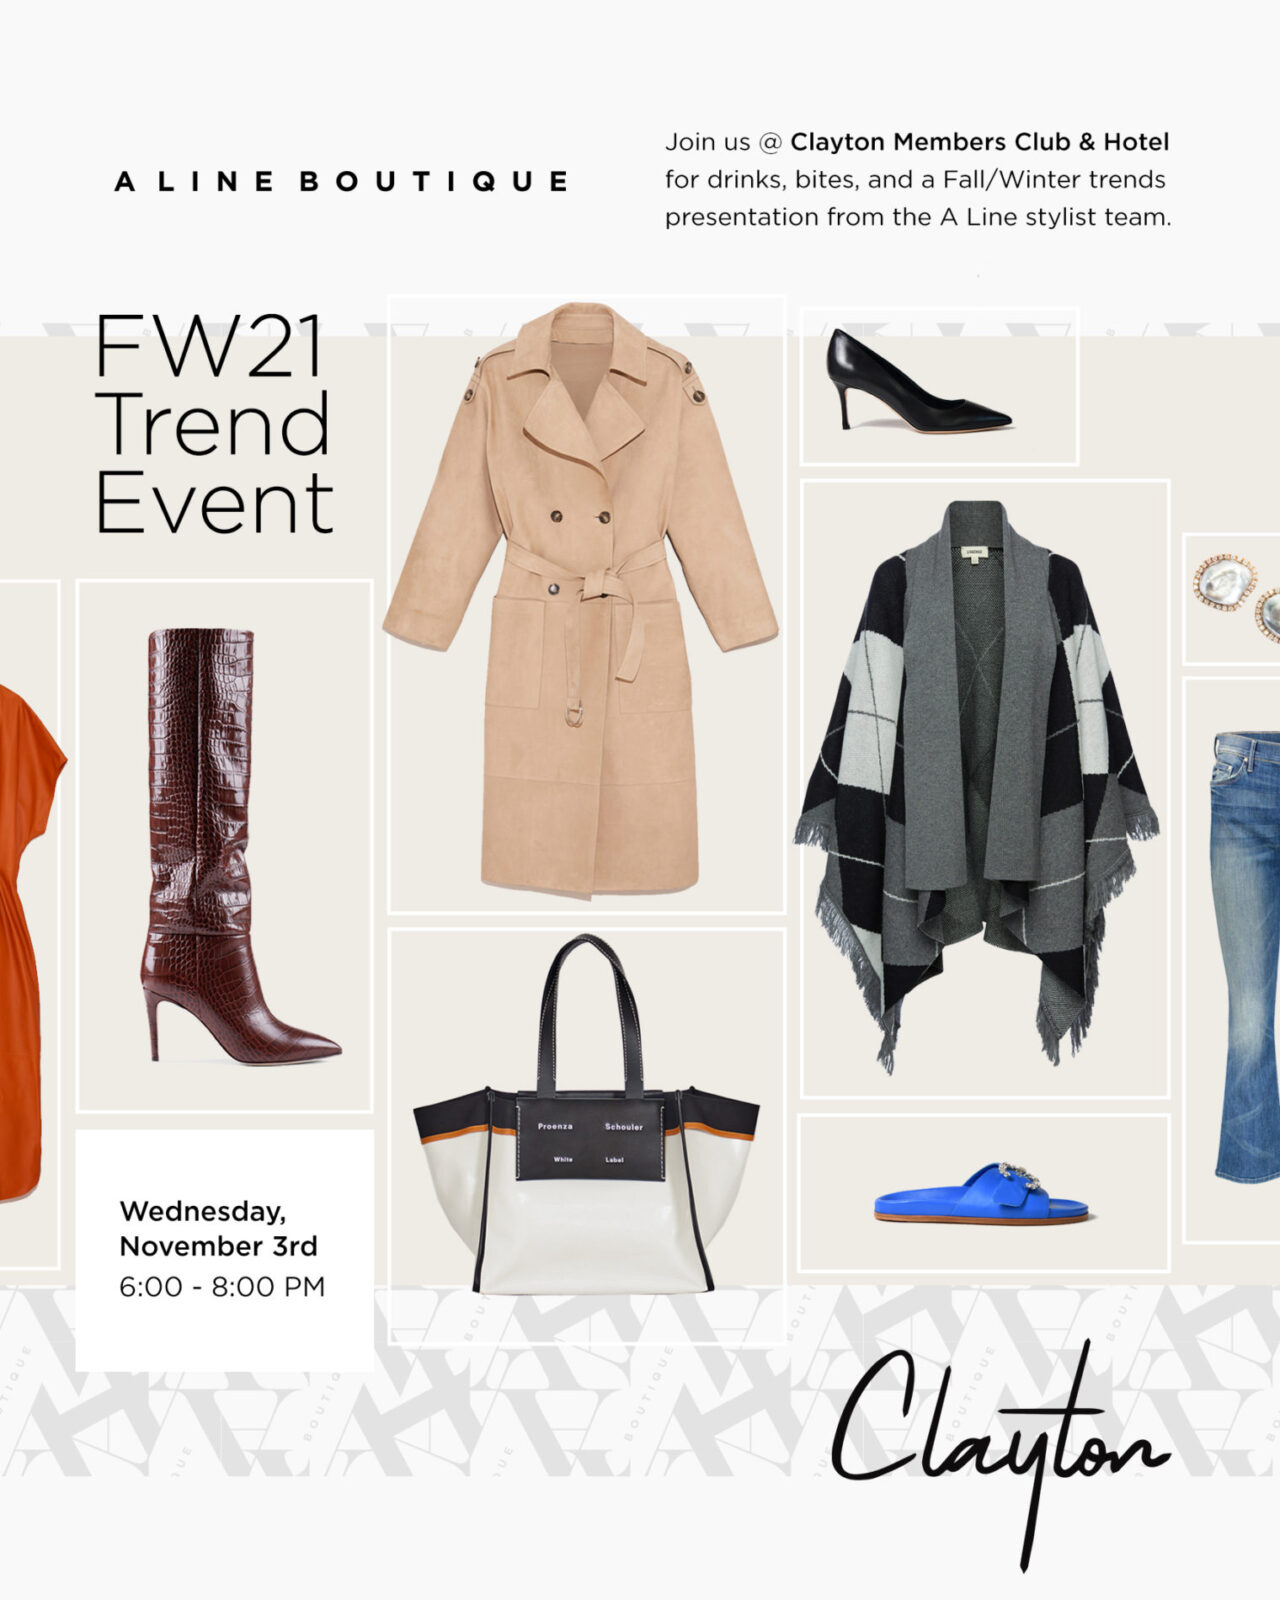 FW21 Trend Event at the Clayton Hotel in Cherry Creek, CO Flyer for the Fall/Winter Fashion showing boots, coats and bags